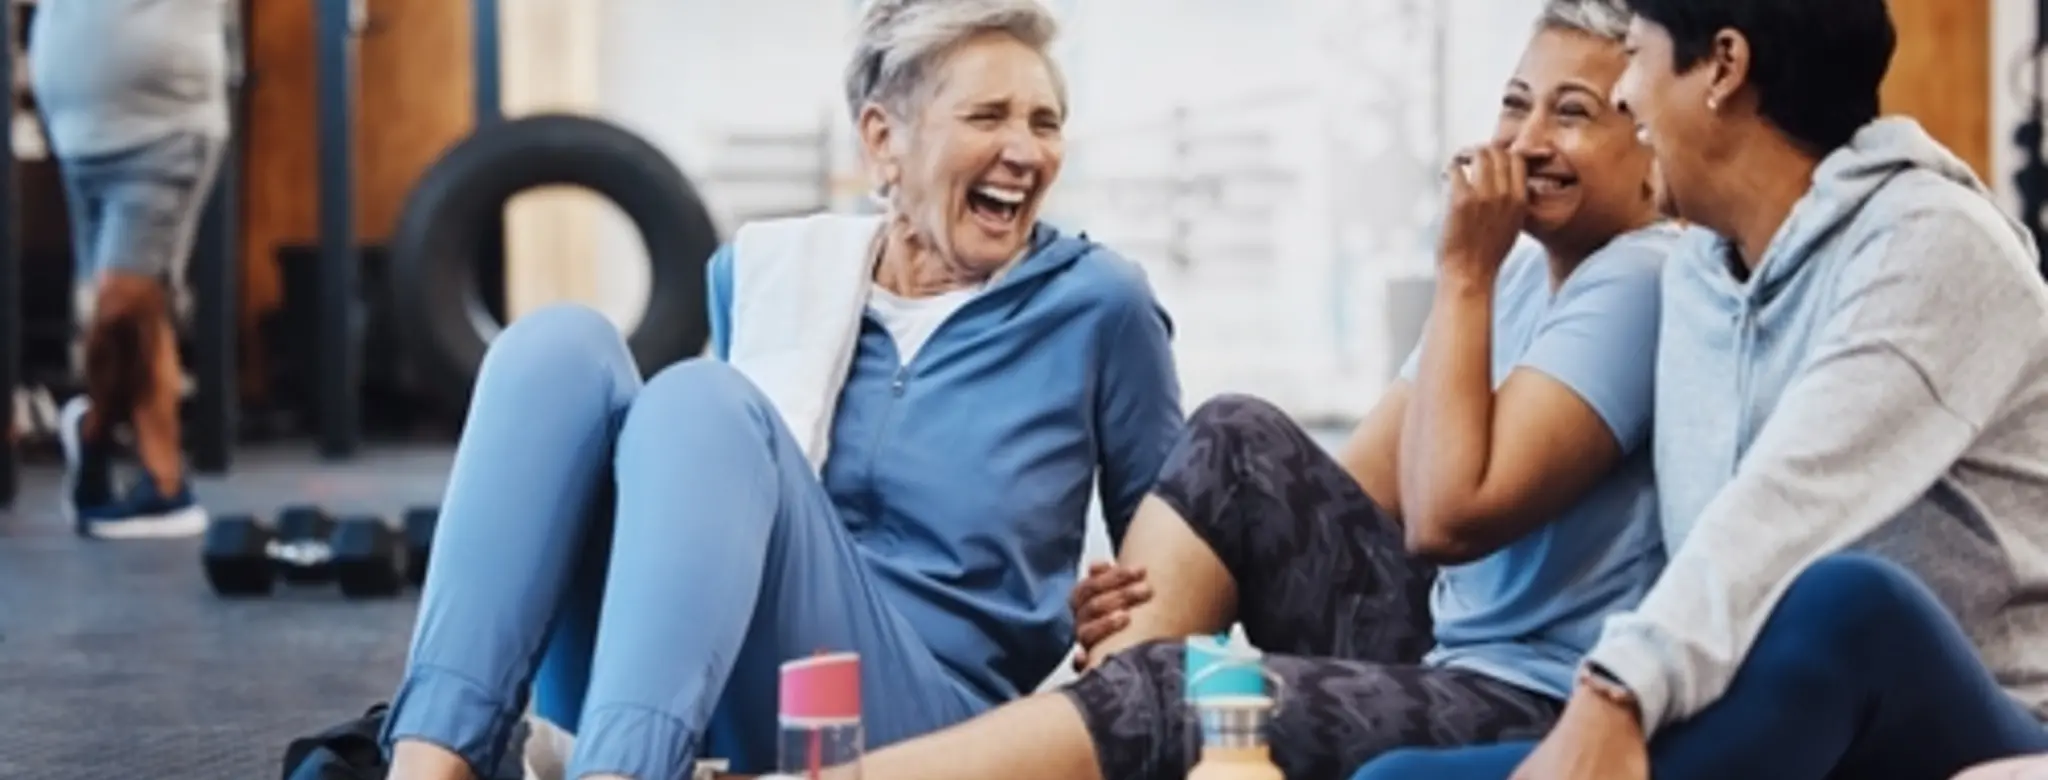 Three women in blue shirts sitting and laughing after a workout class